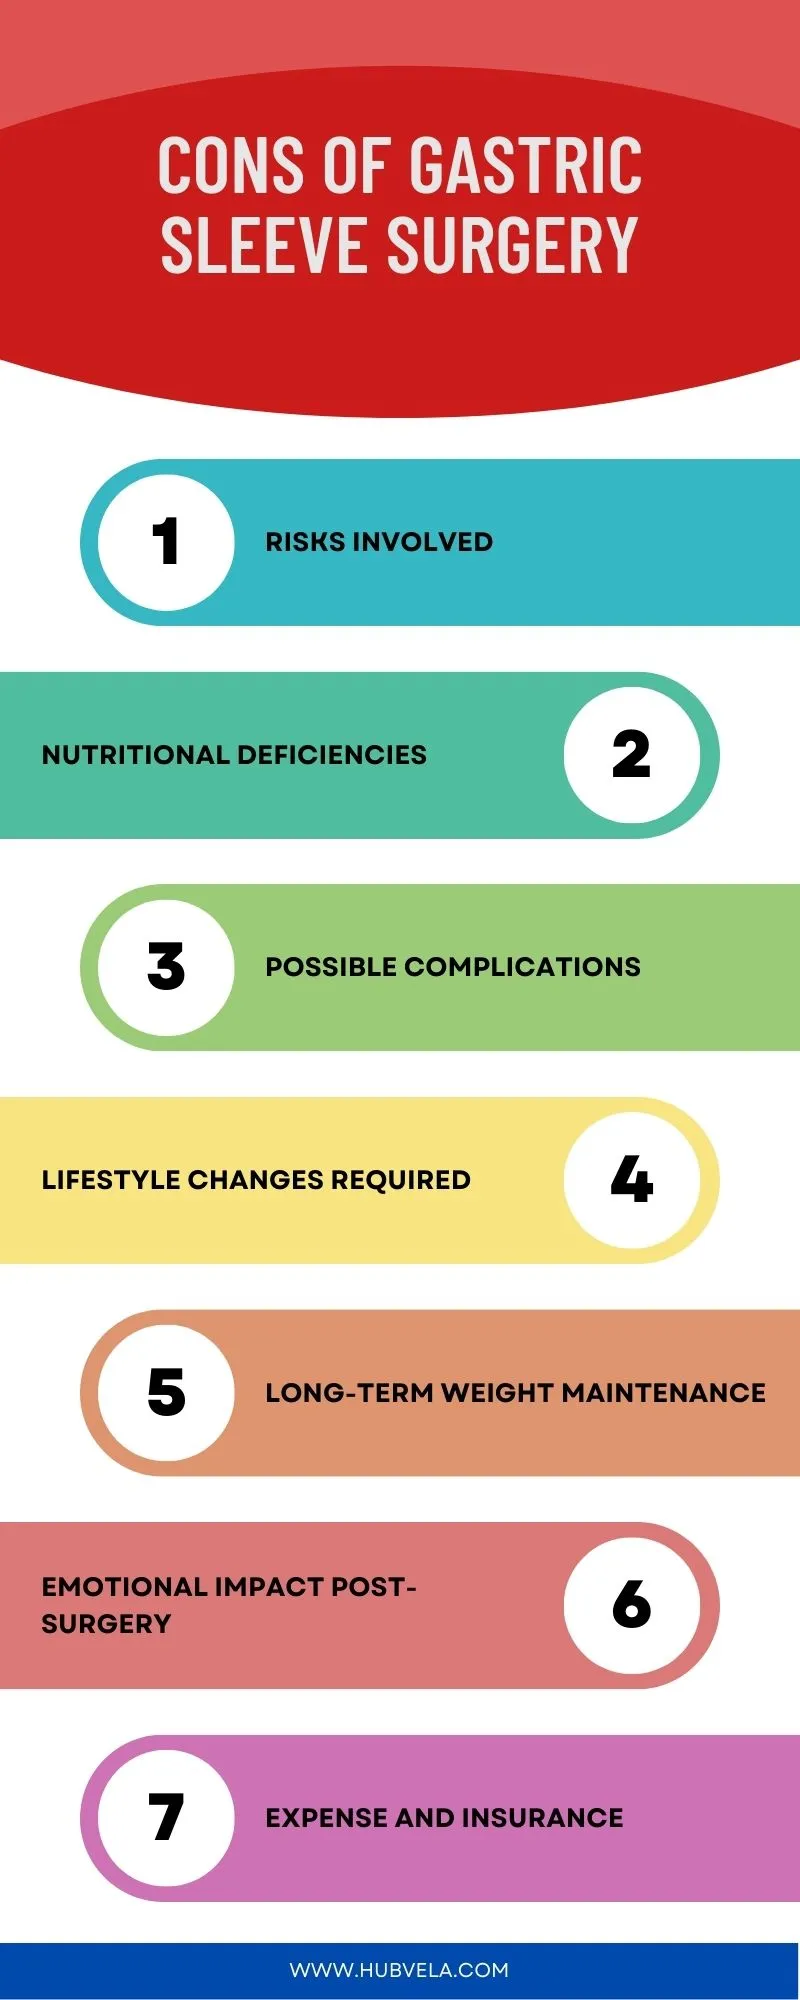 Cons Of Gastric Sleeve Surgery Infographic